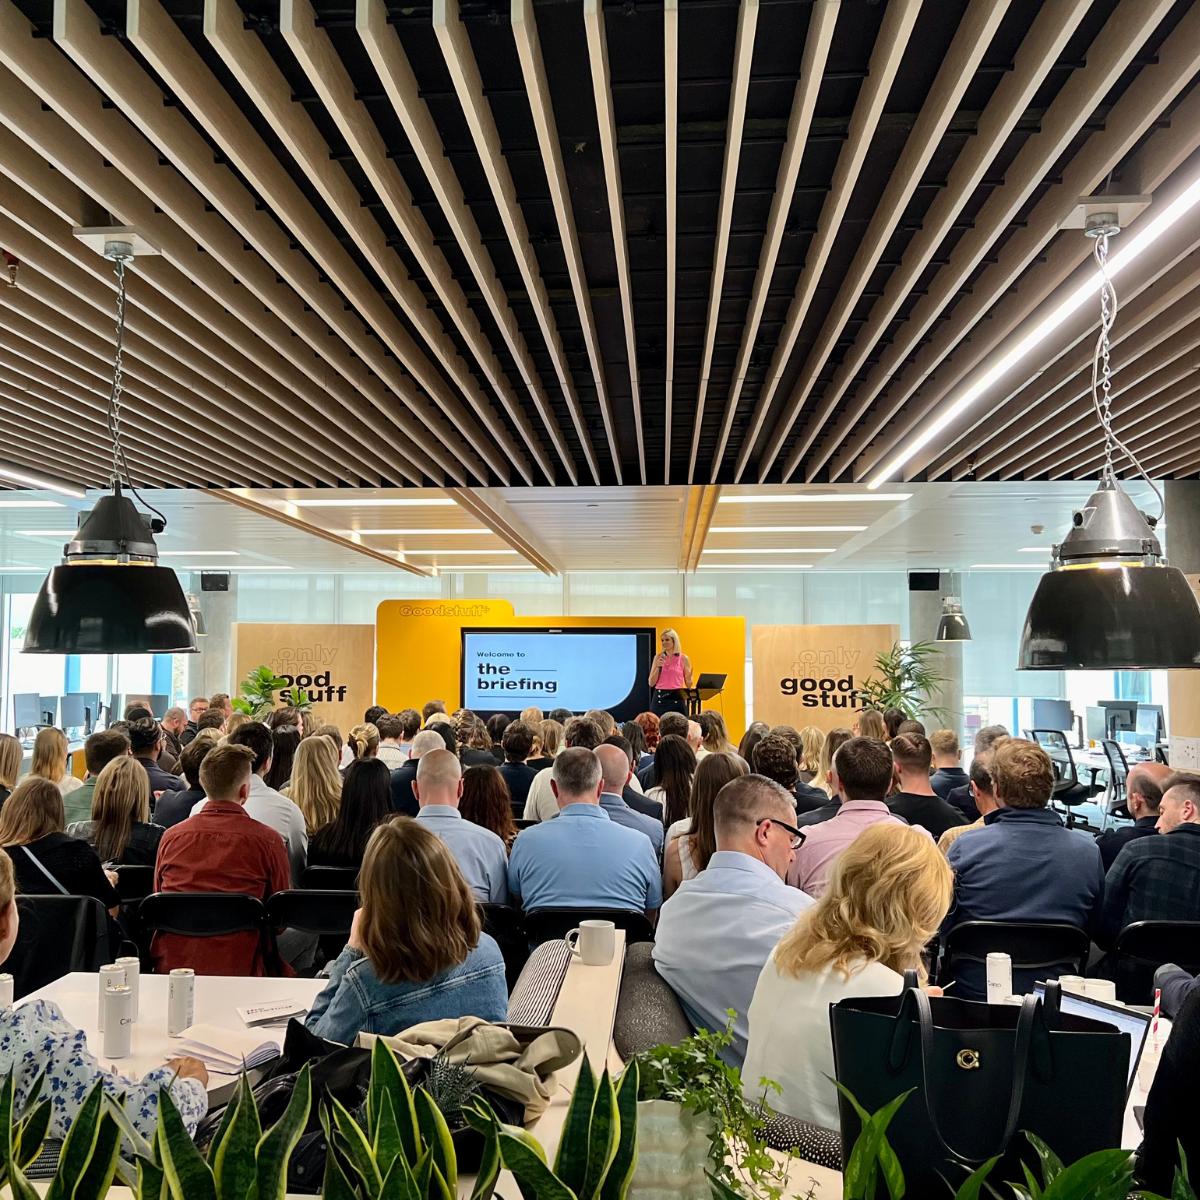 A full house for The Briefing today. Our exclusive event for media owners to hear live briefs directly from a handful of Goodstuff clients. Our aim is to inspire even more inventive thinking, ideas and collaboration. And if that’s not enough, for the first time ever we shared the